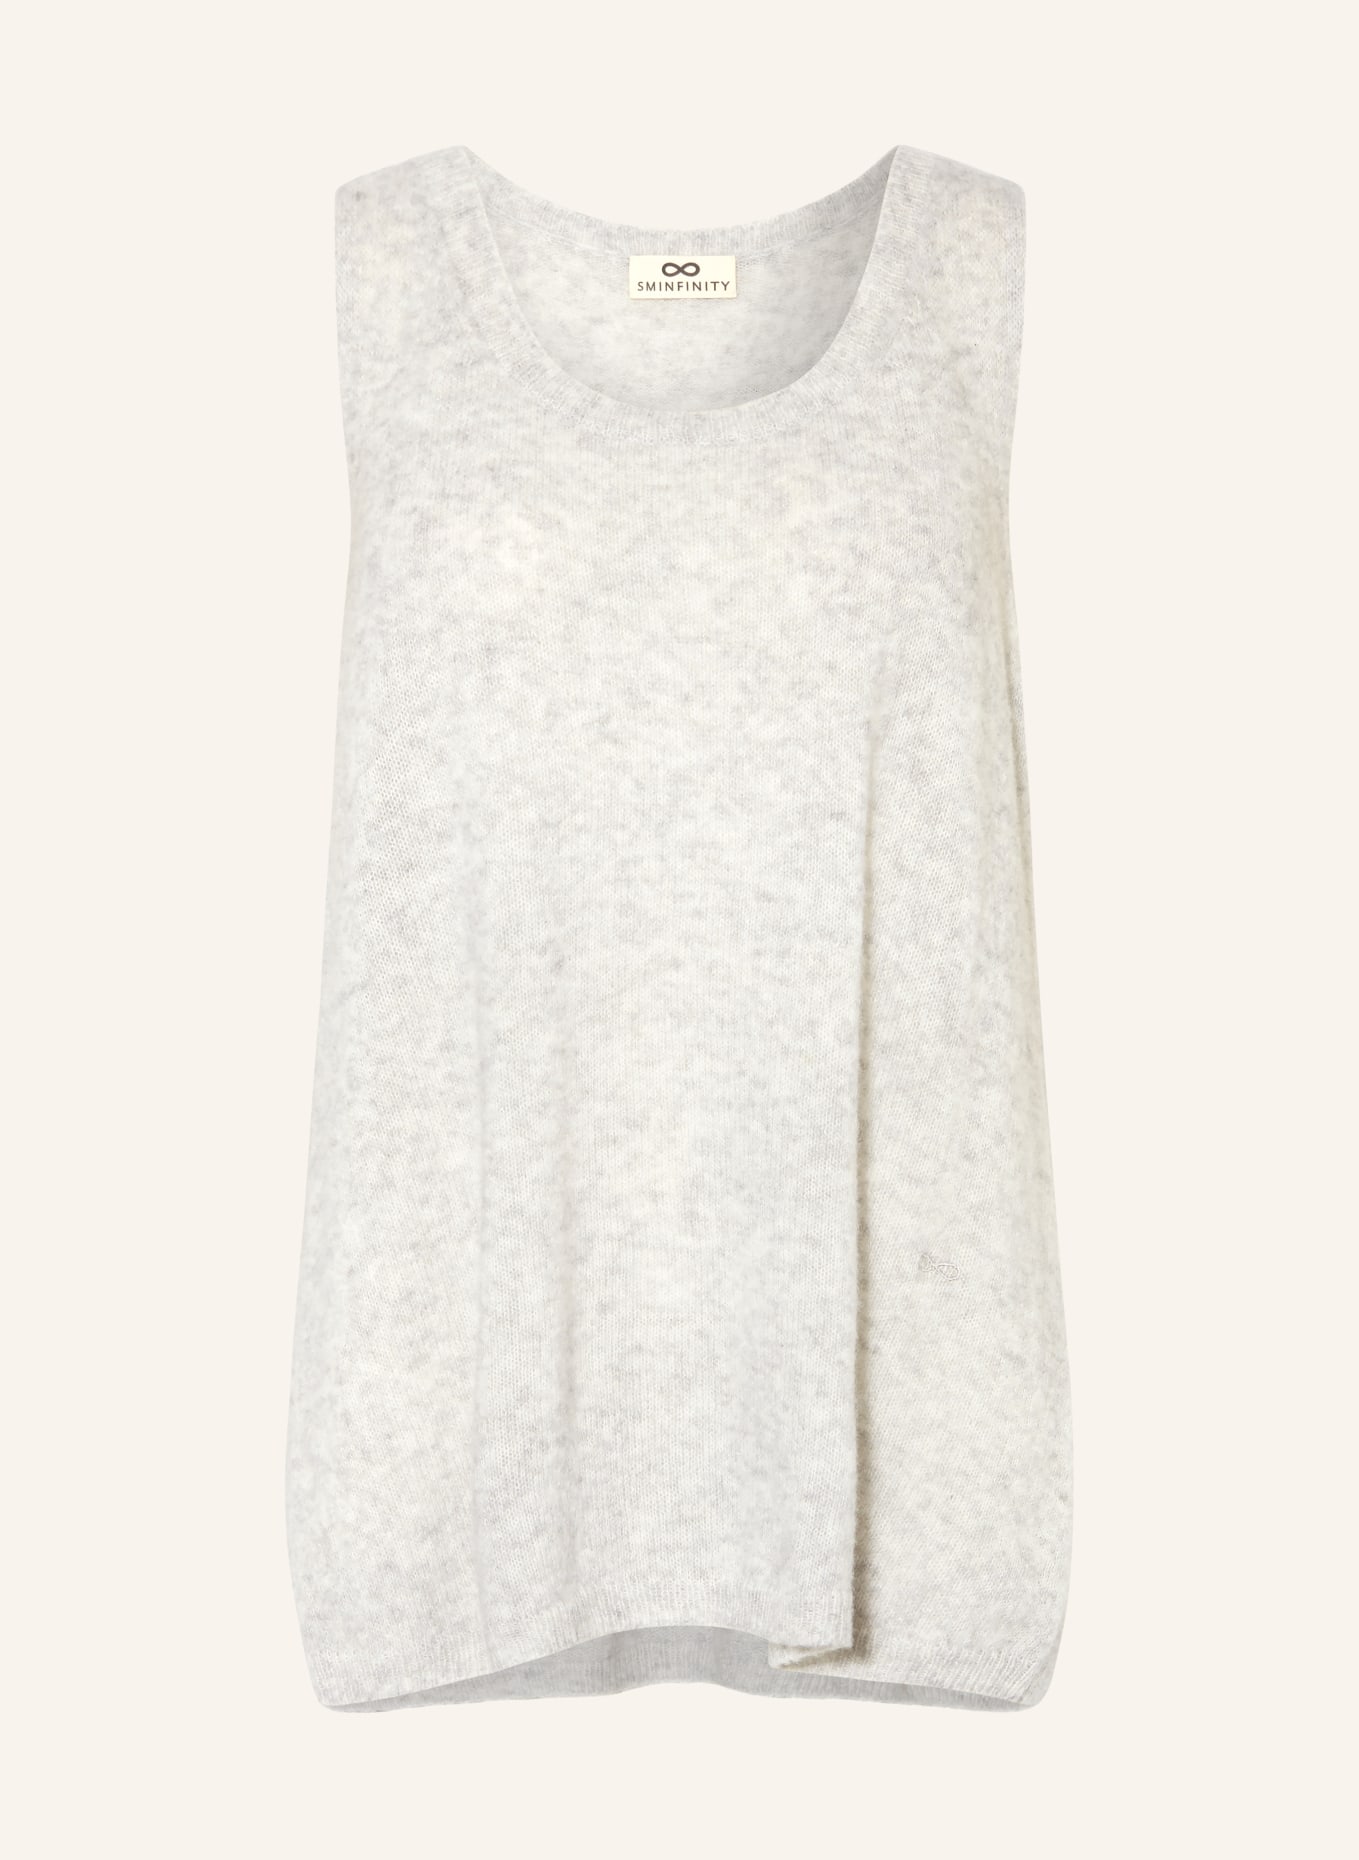 SMINFINITY Knit top with cashmere, Color: LIGHT GRAY (Image 1)